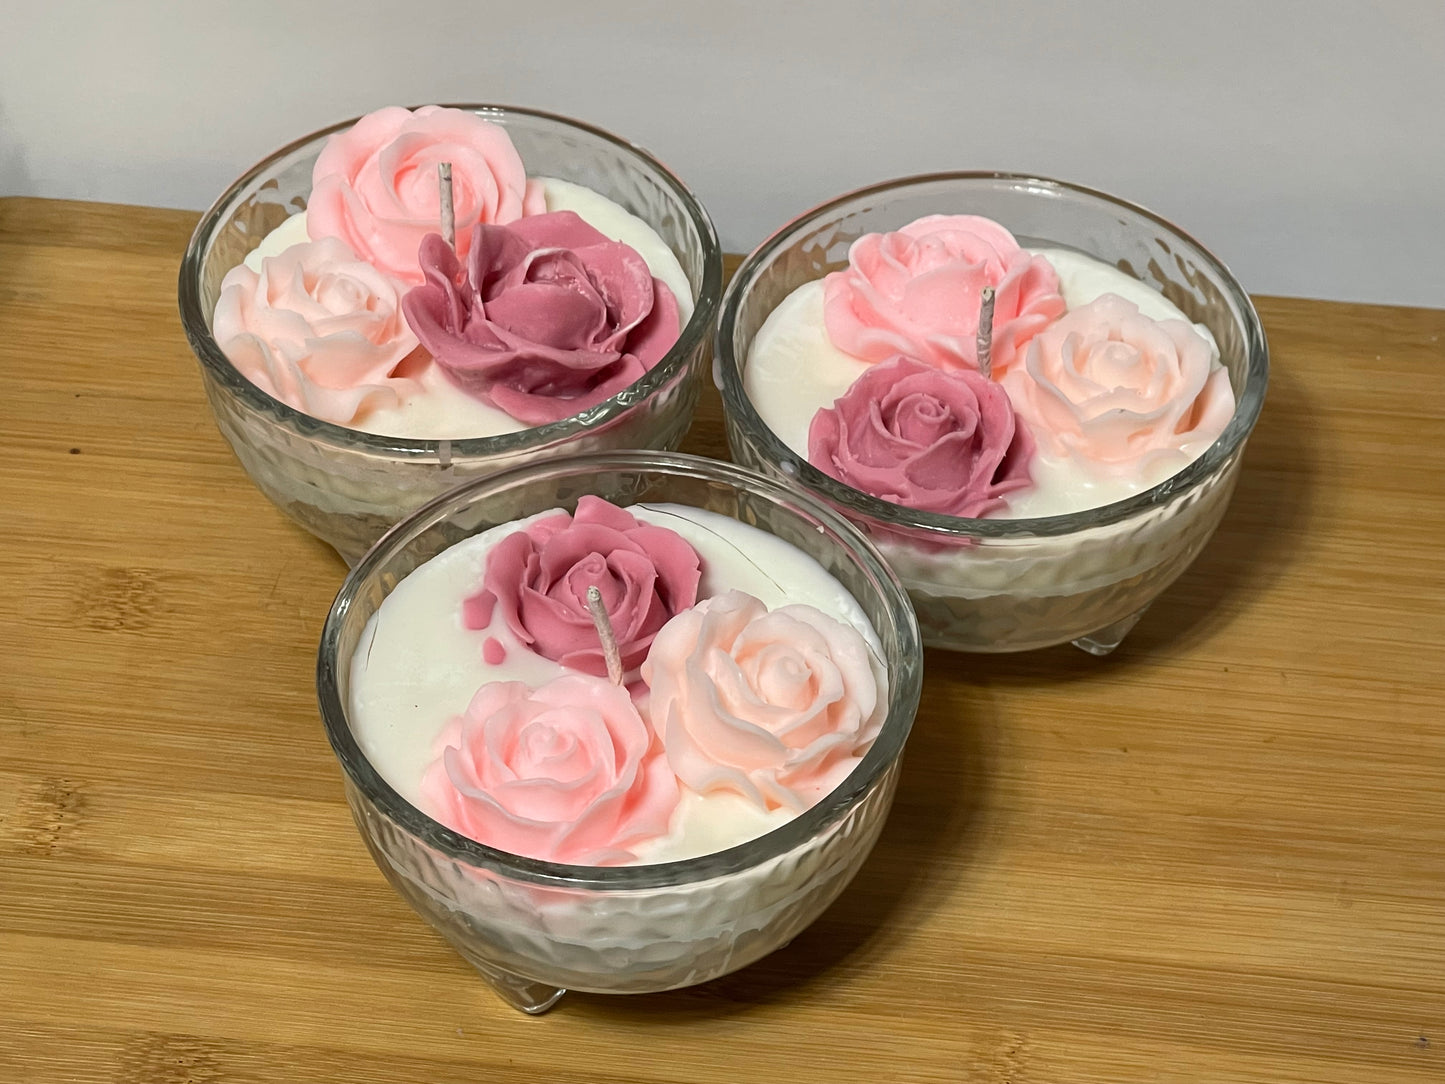 Mother’s Day Sale! Vela rosas y un molcajete/glass bowl unscented candle/roses &molcajete/hand poured soy wax candle/mothers day gift/valentines gift